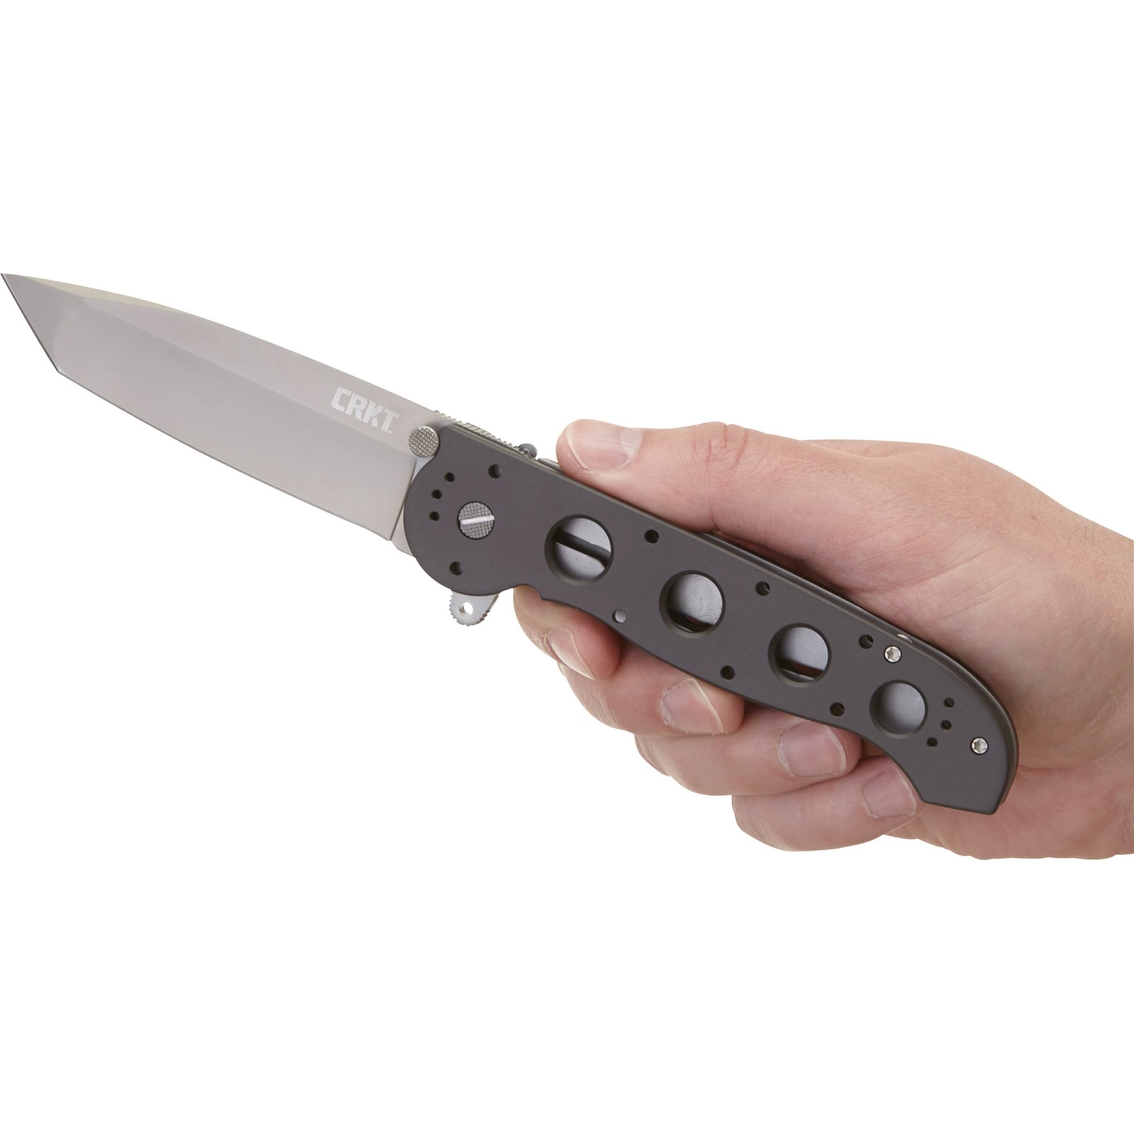 Columbia River Knife & Tool M16 -04S Classic Clip Folder Knife - Image 4 of 4